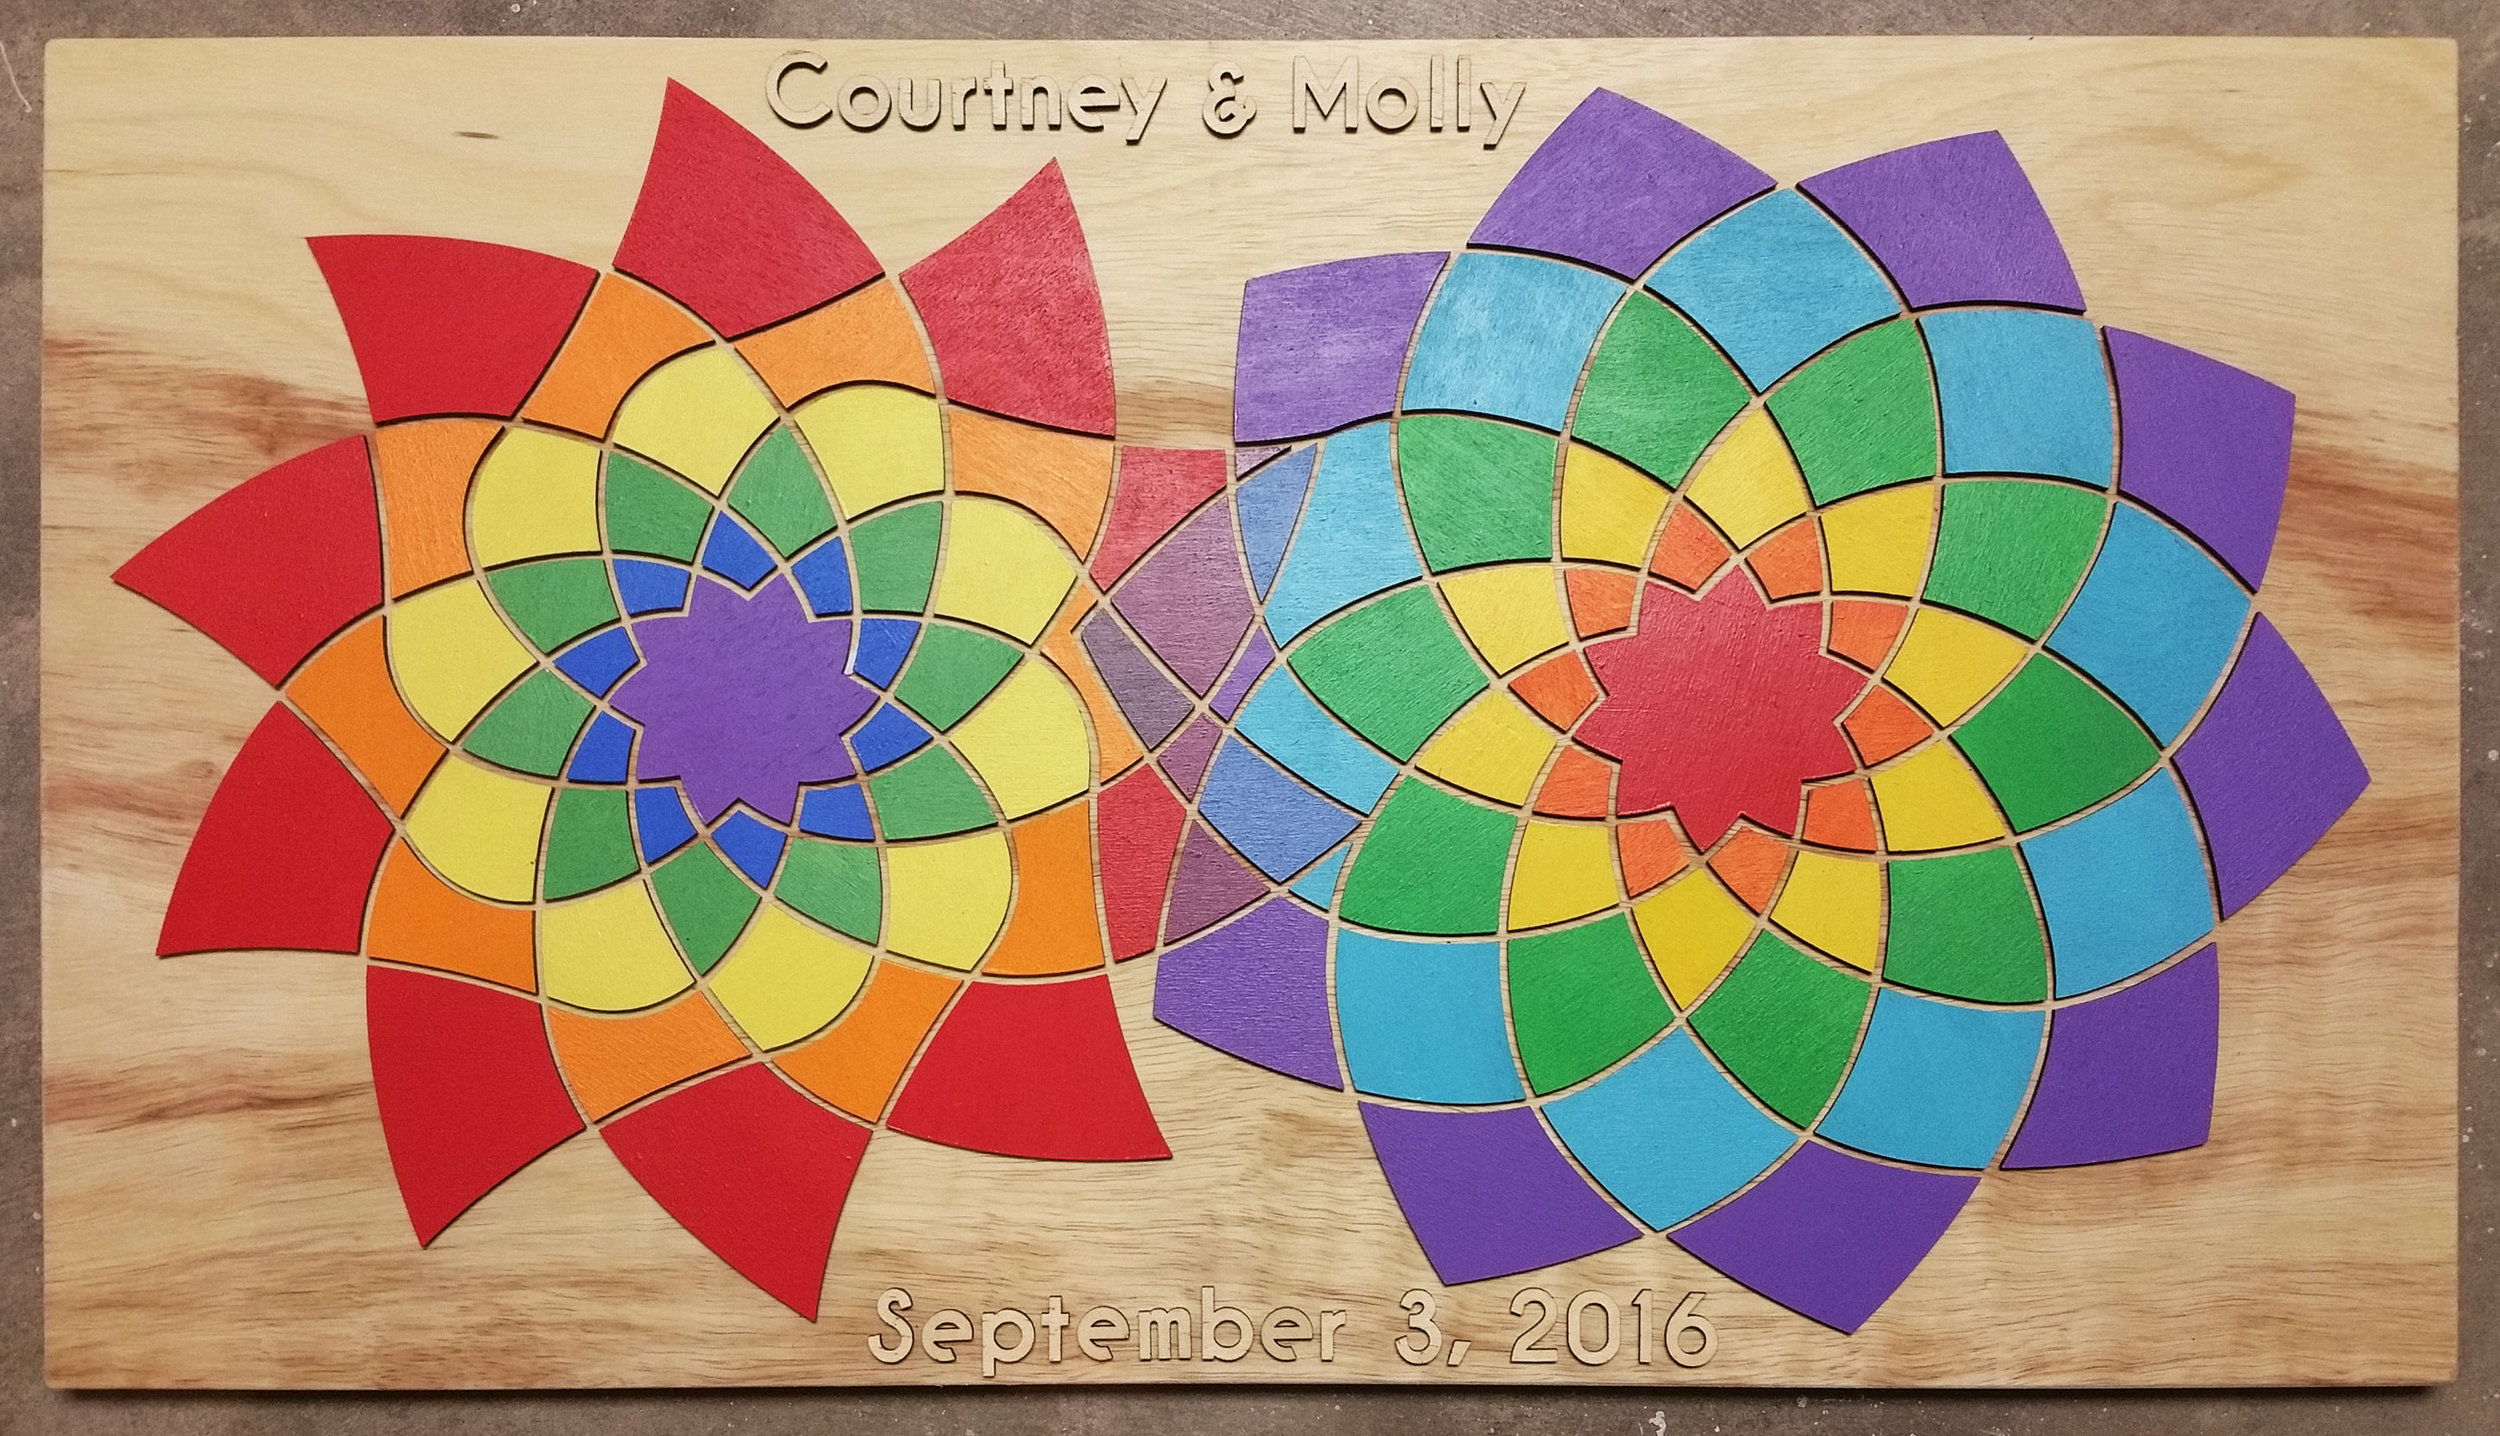 Courtney & Molly's Guestbook